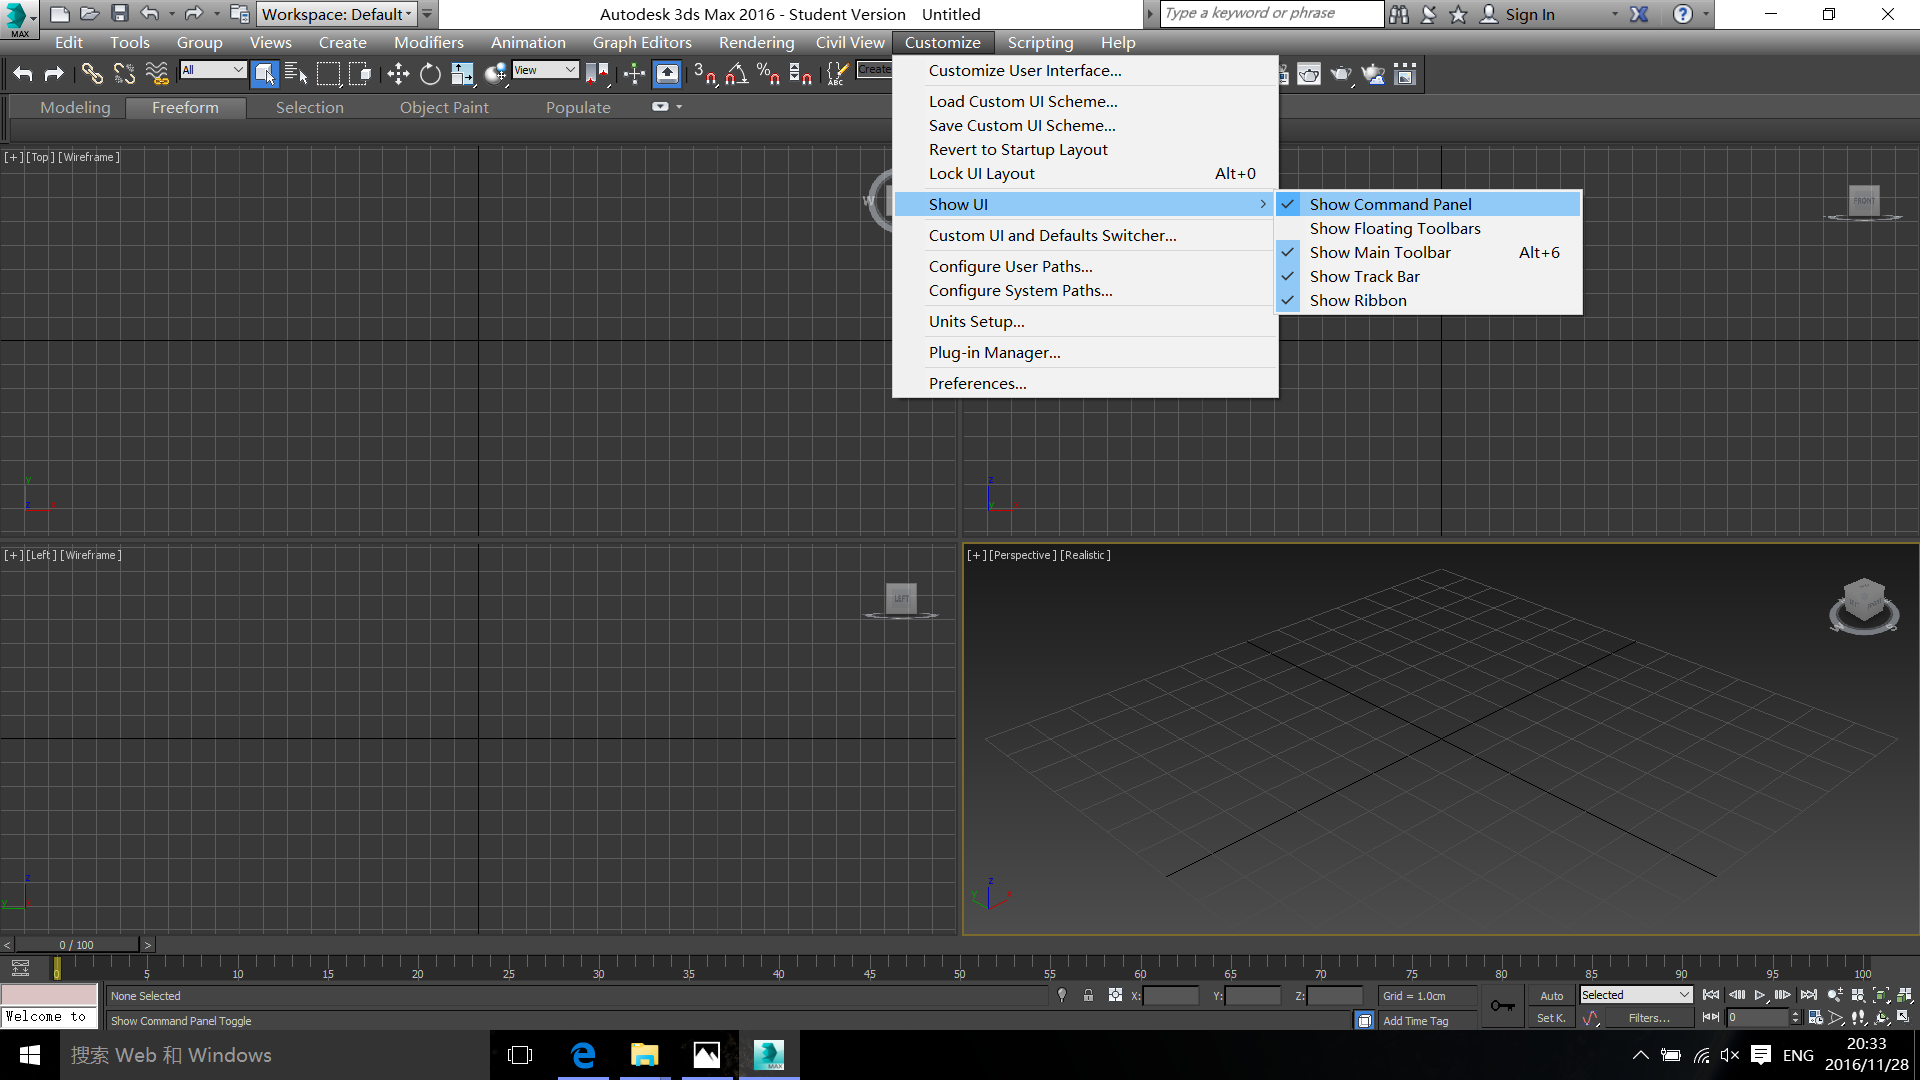 The command panel disappeared, probably a bug - Autodesk Community - 3ds Max